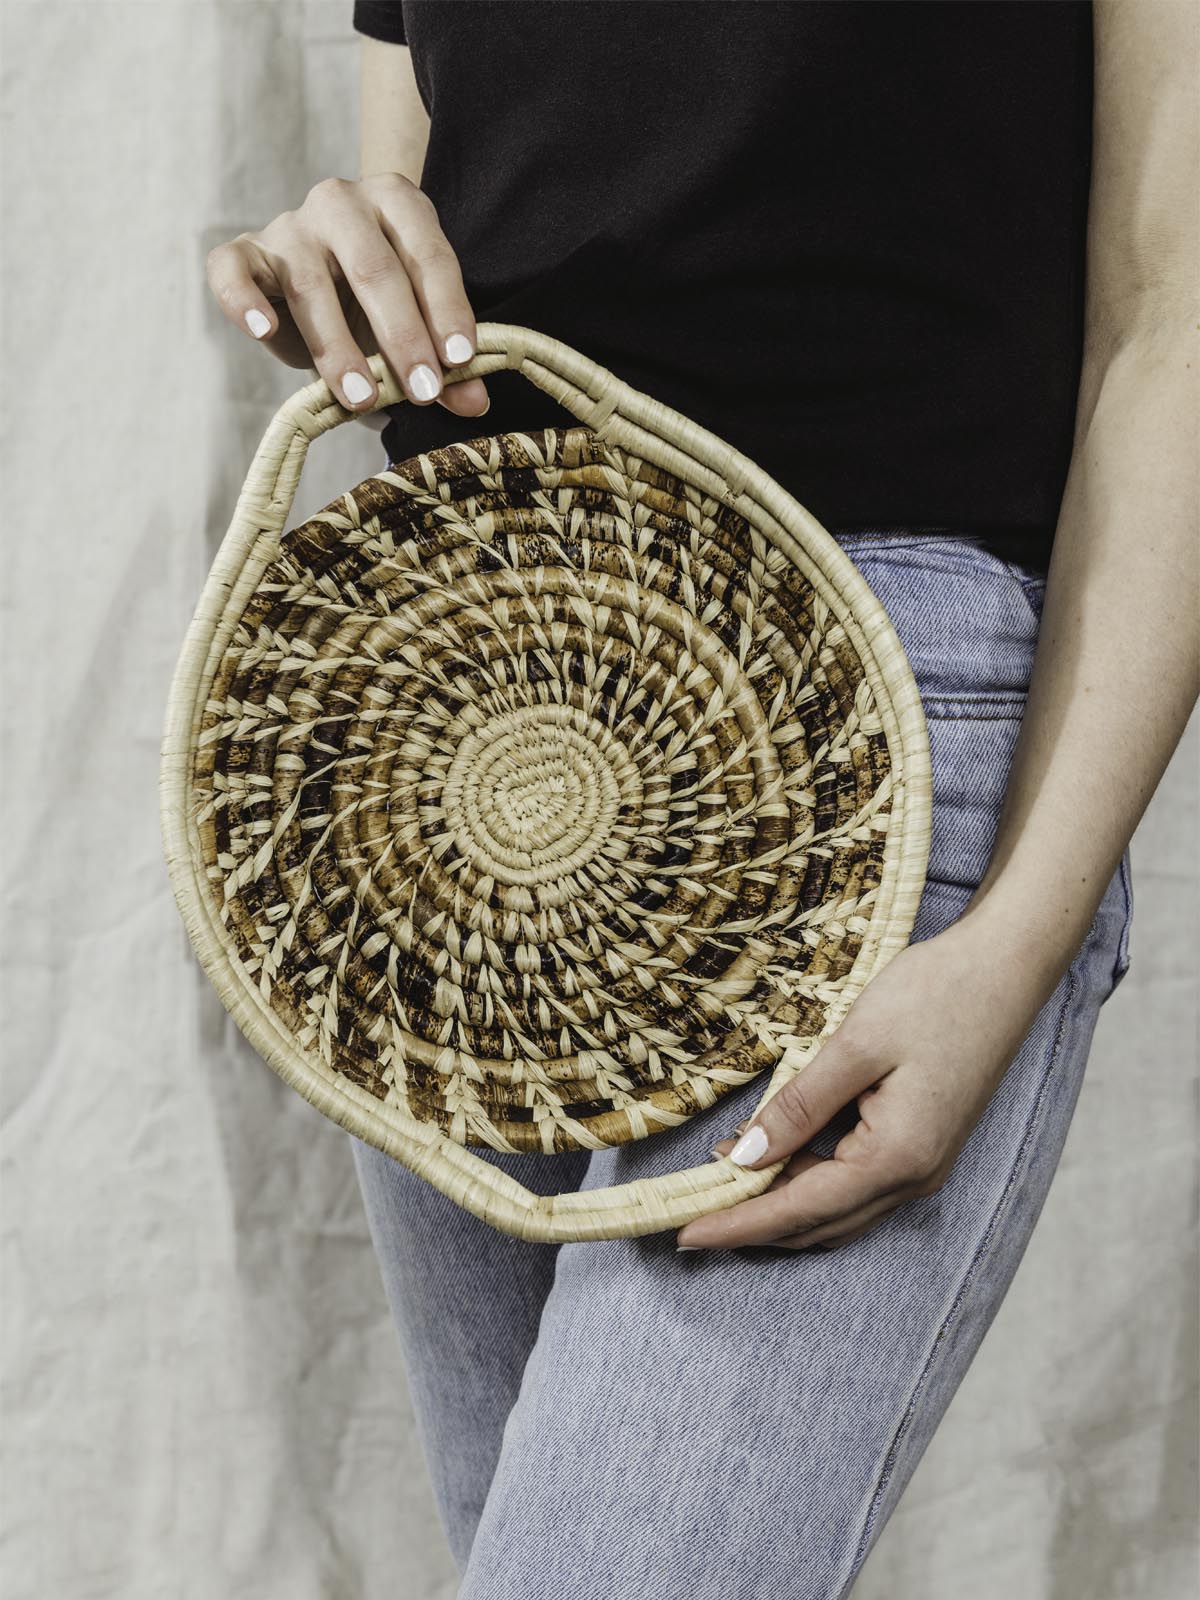 Model holding small brown and tan woven basket with handles